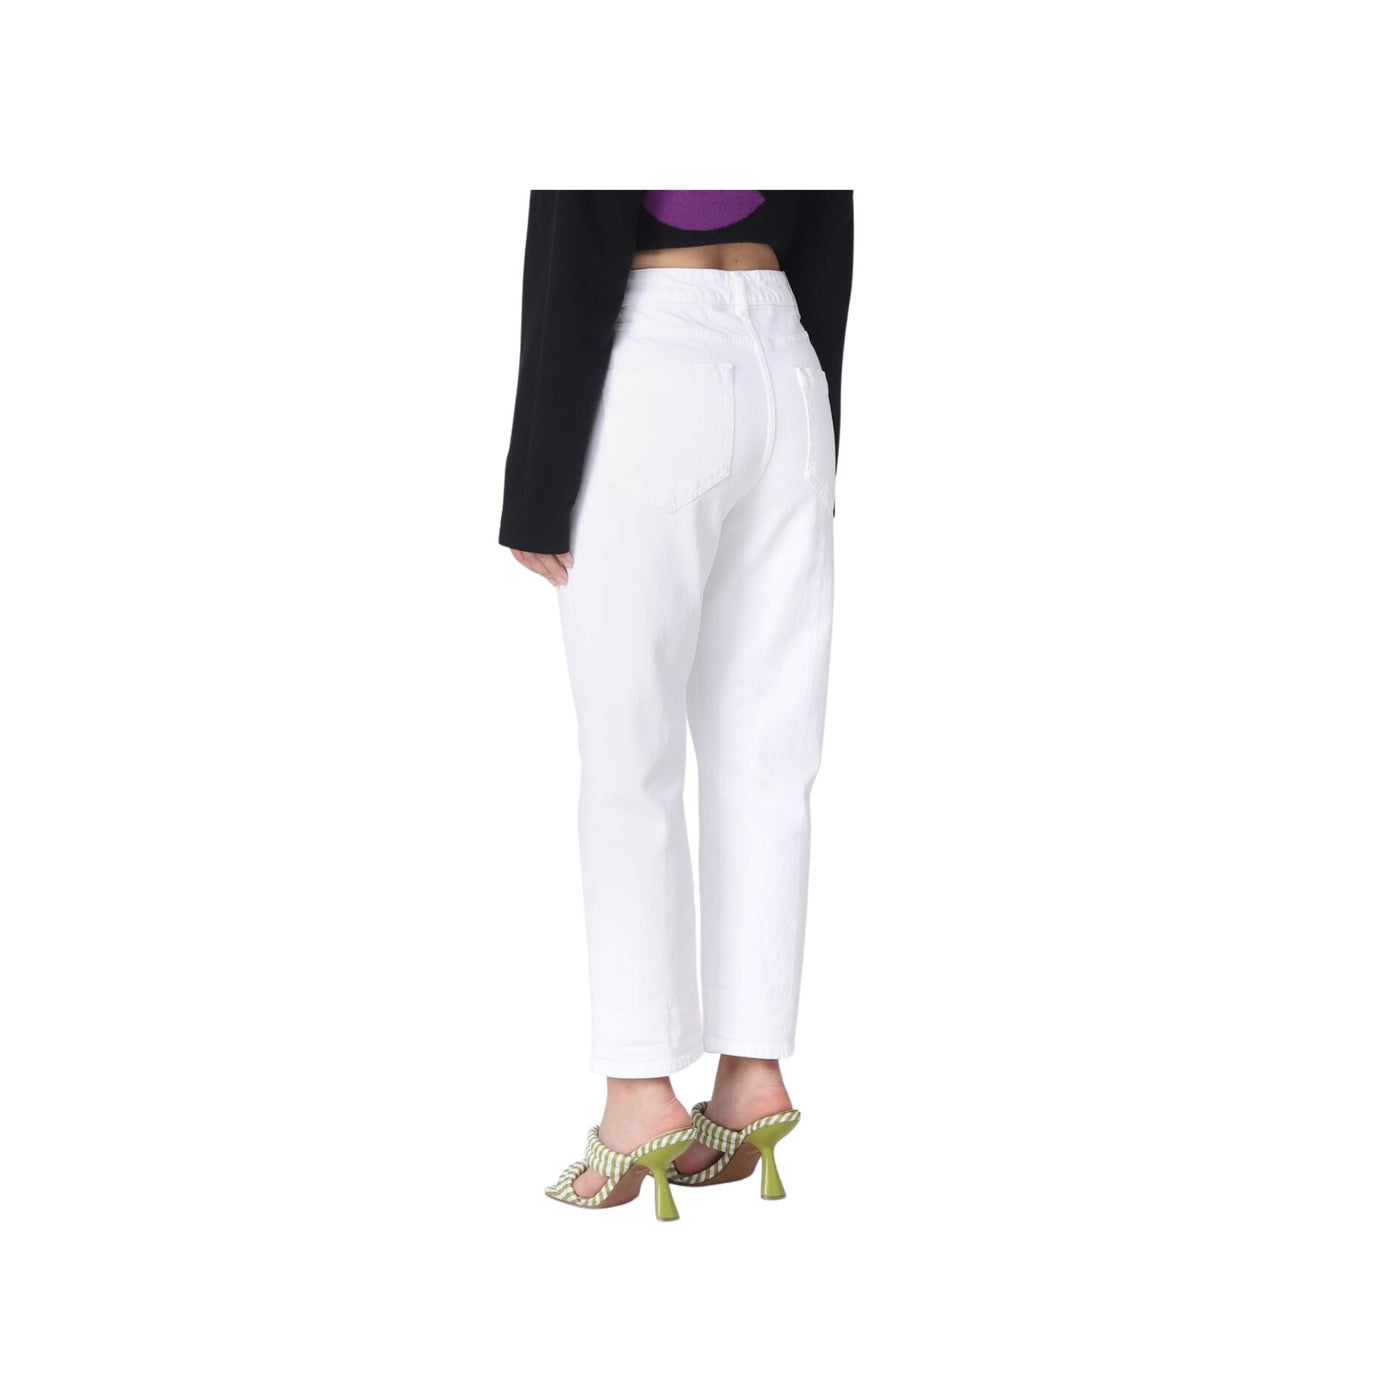 Women's trousers in solid colour